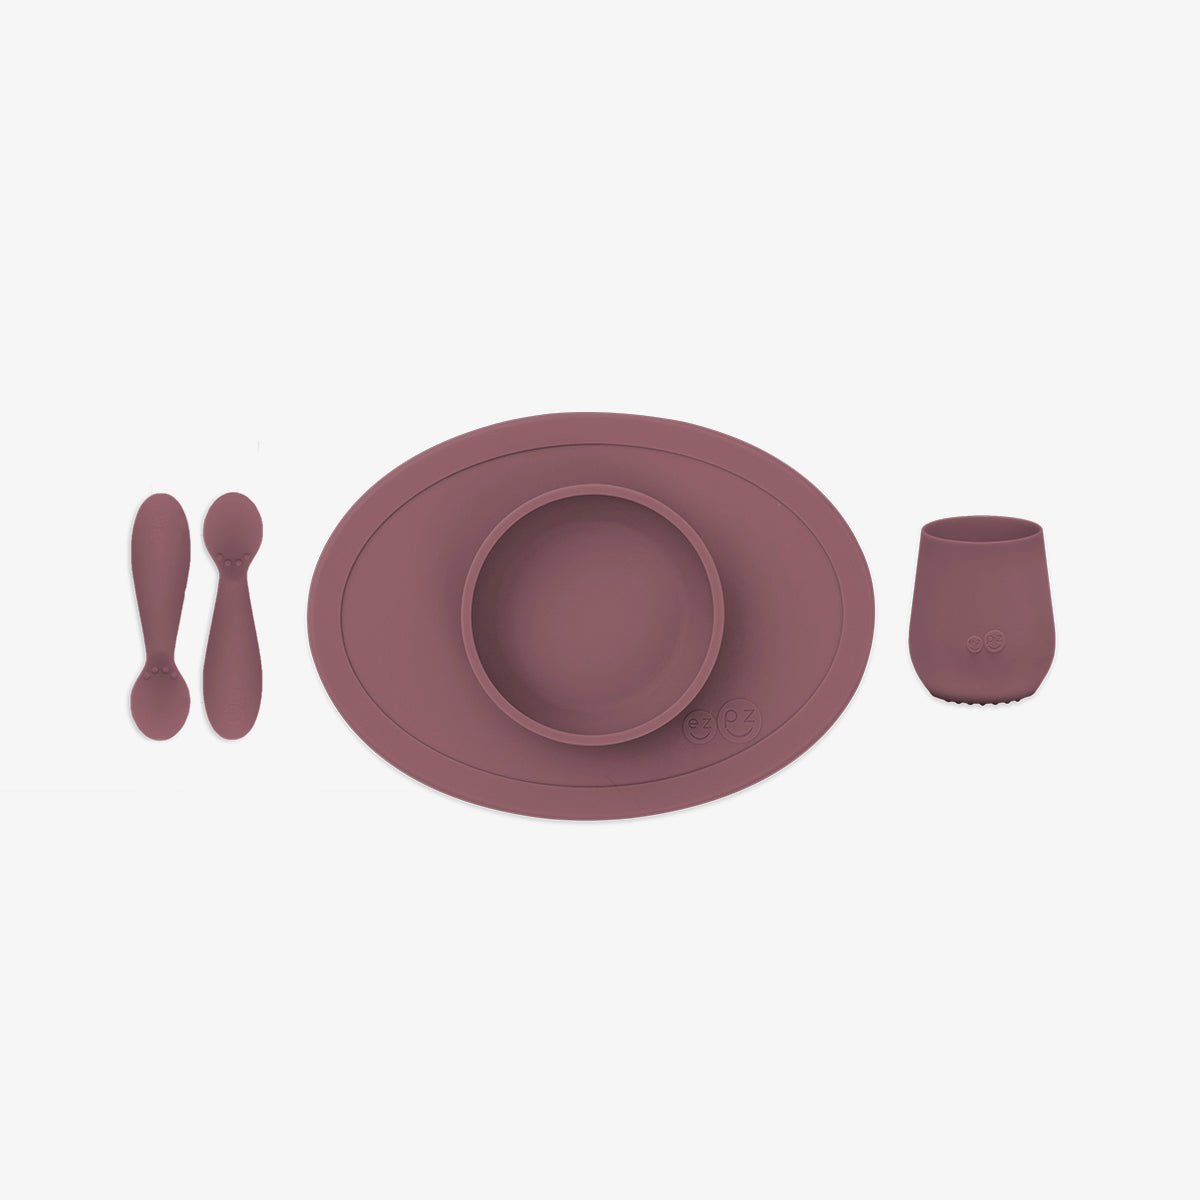 First Foods Set in Mauve by ezpz / The Original All-In-One Silicone Plates & Placemats that Stick to the Table